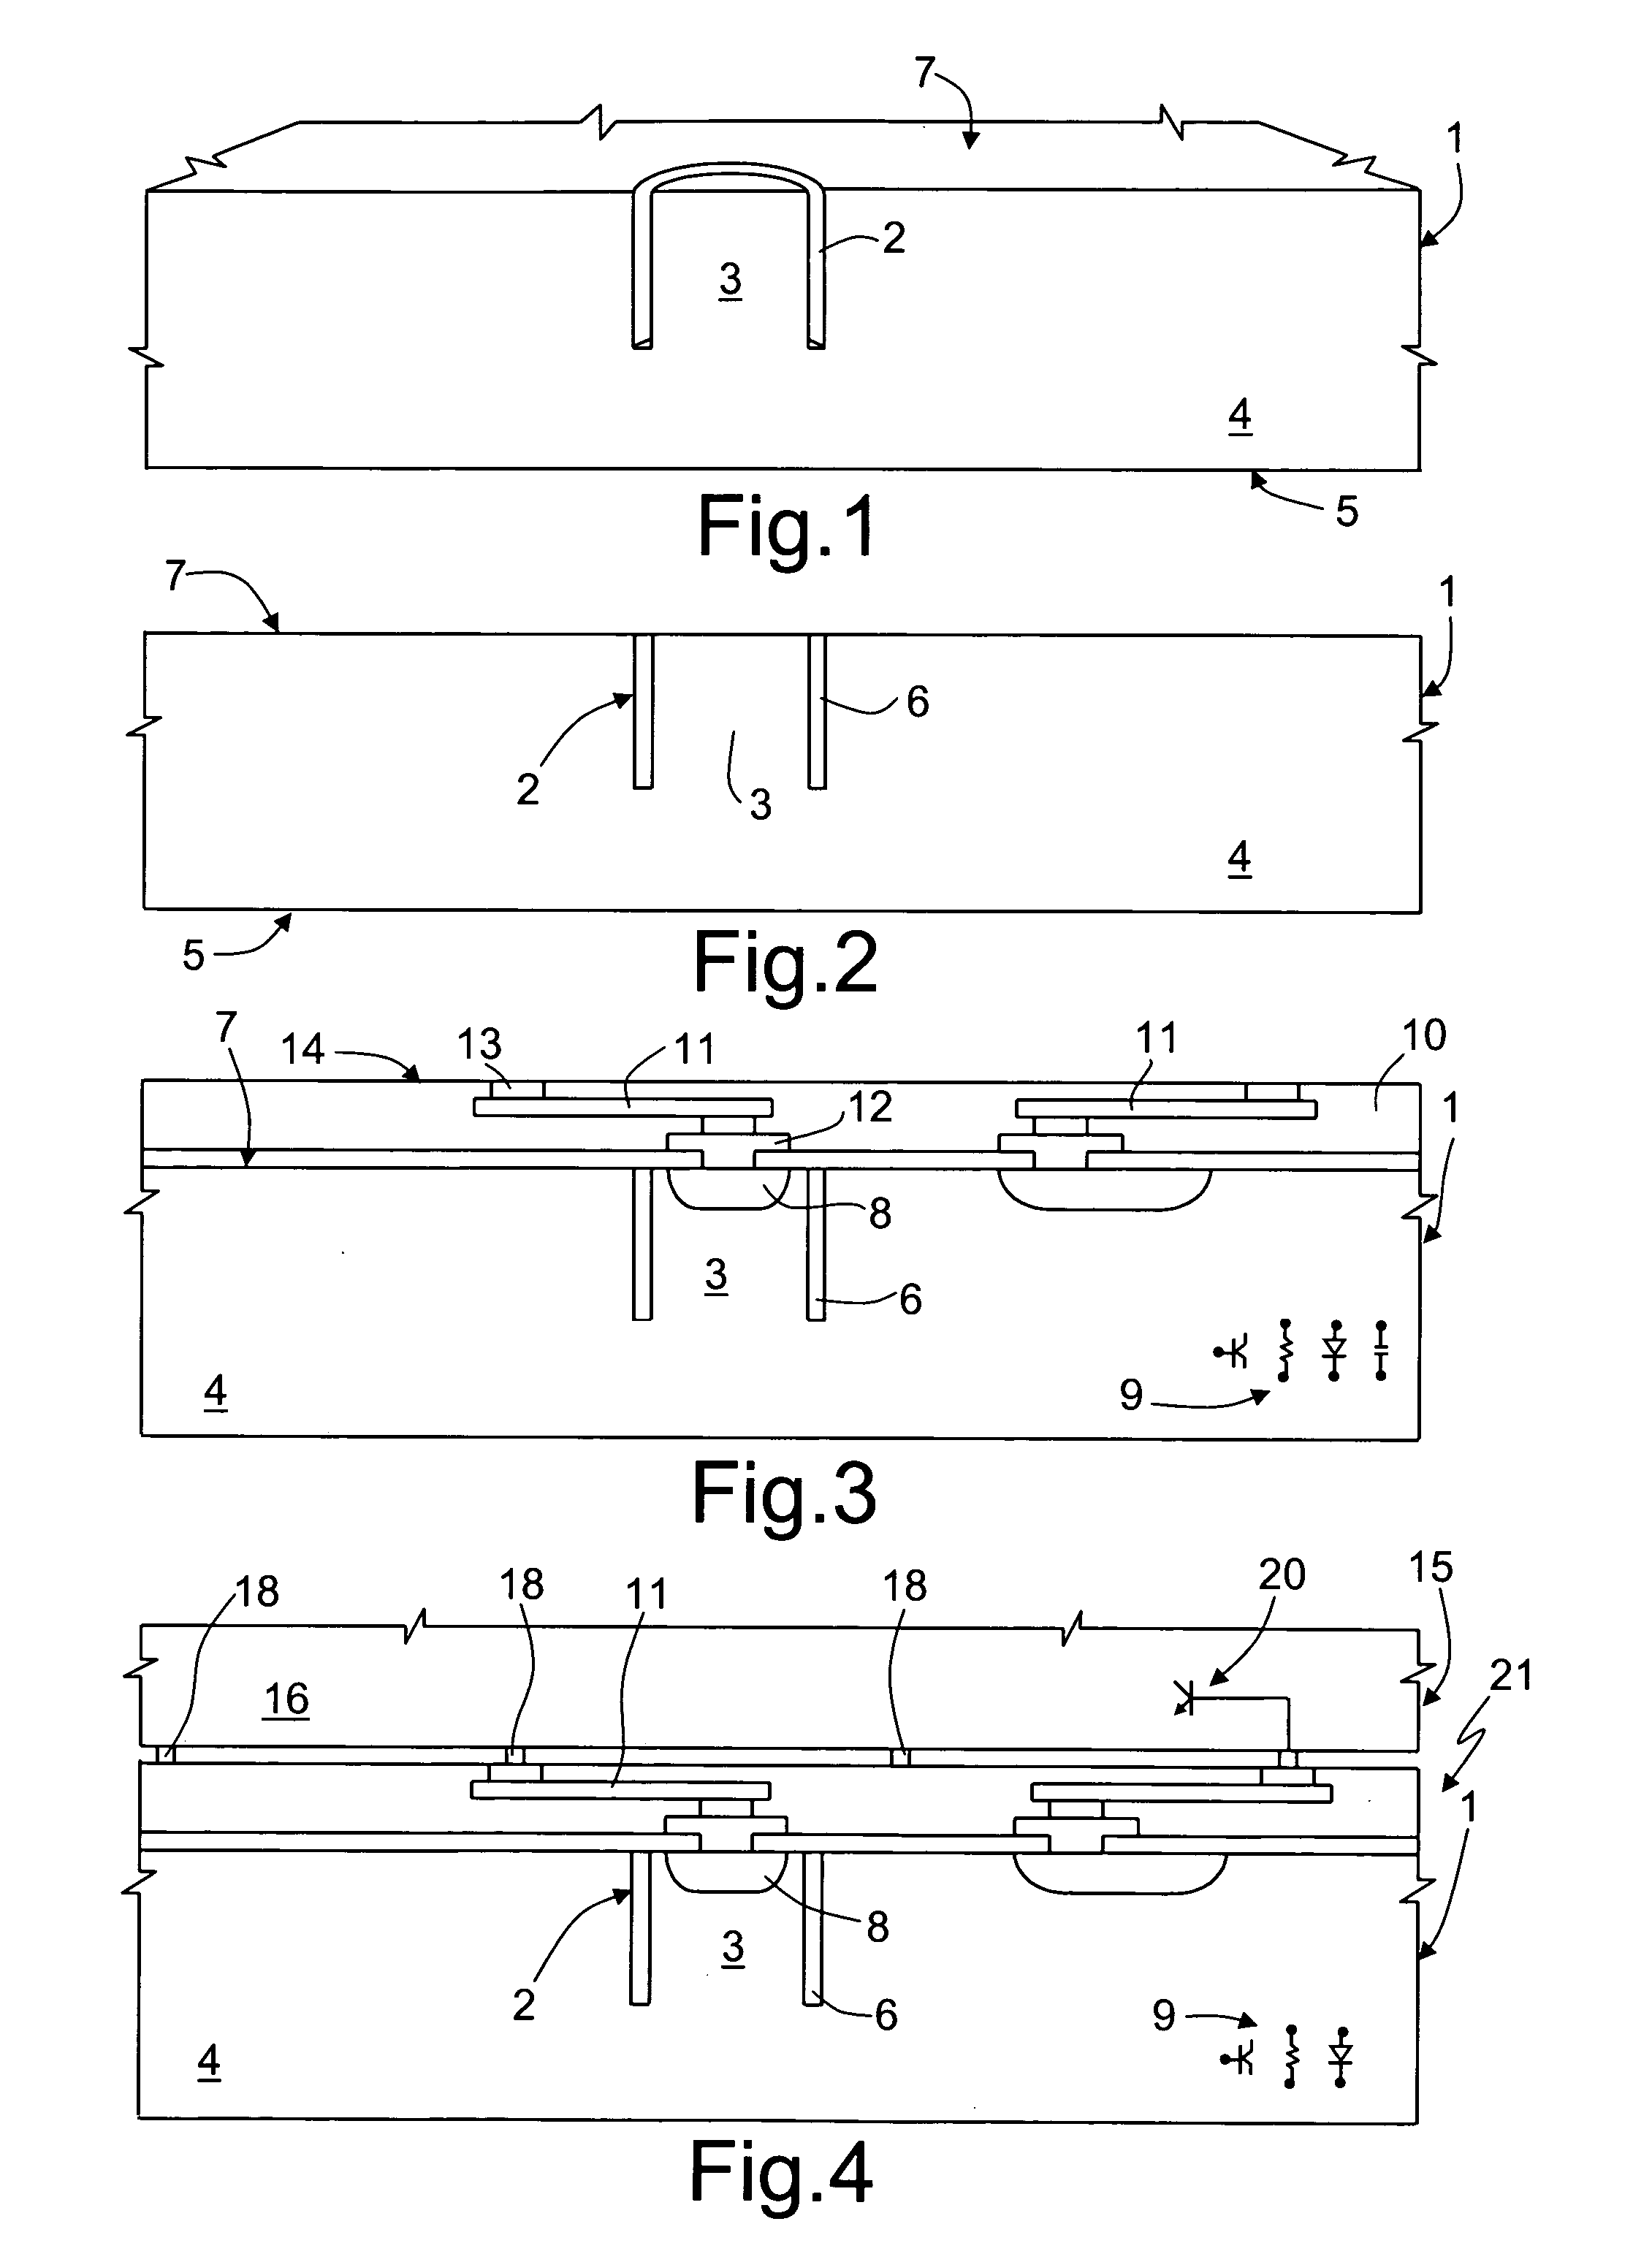 Process for manufacturing a through insulated interconnection in a body of semiconductor material